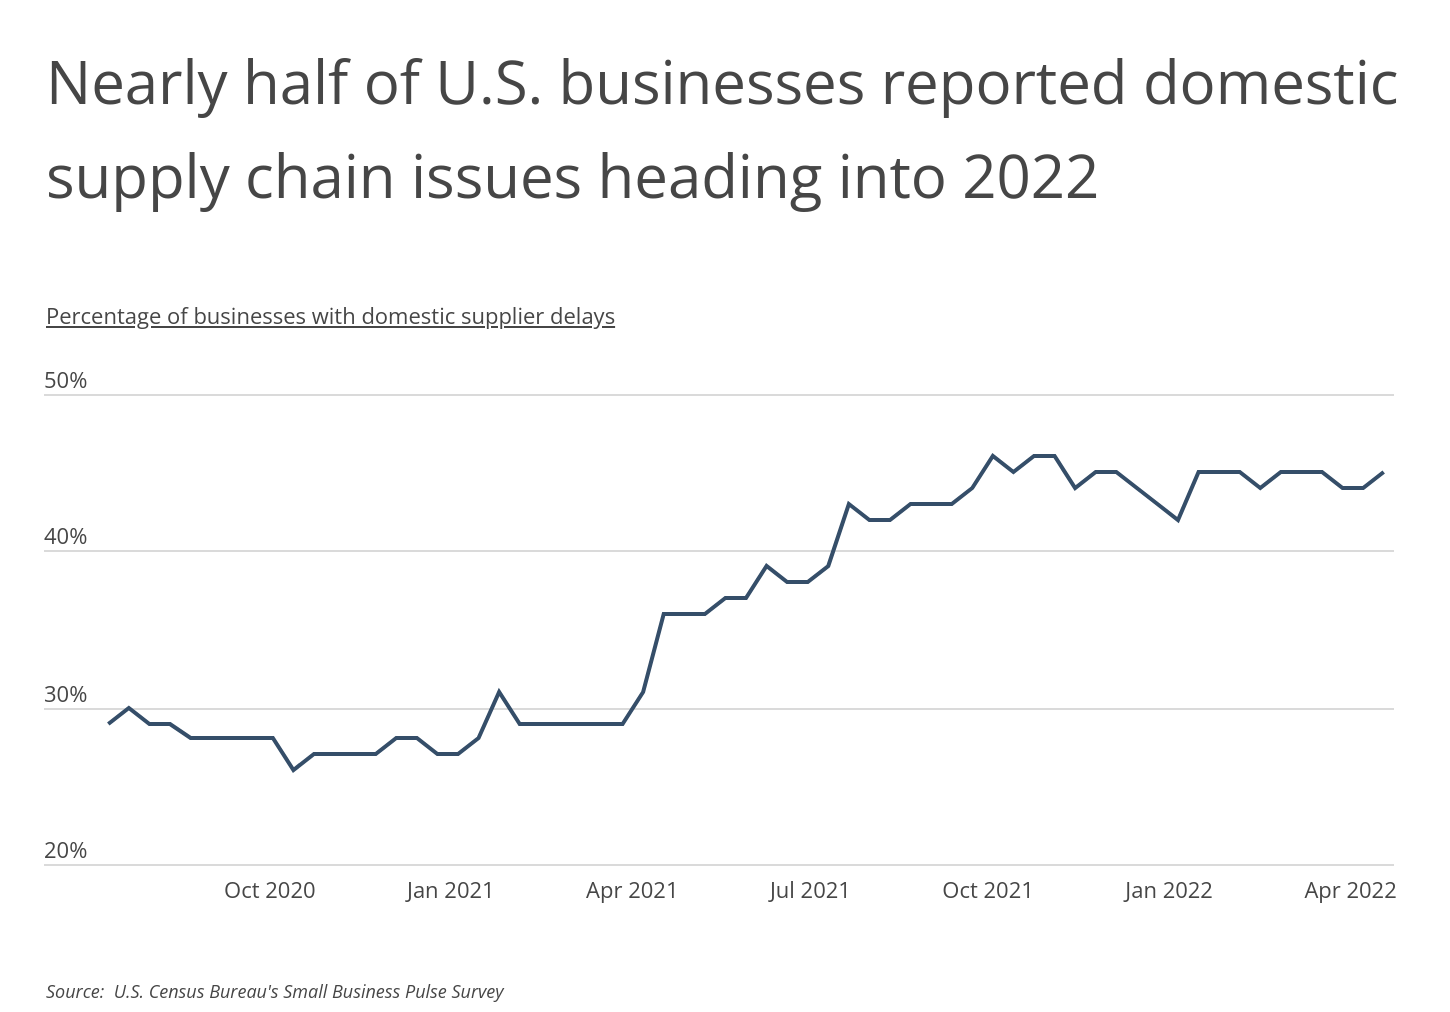 Chart1_Nearly half of US businesses reported supply chain issues starting '22